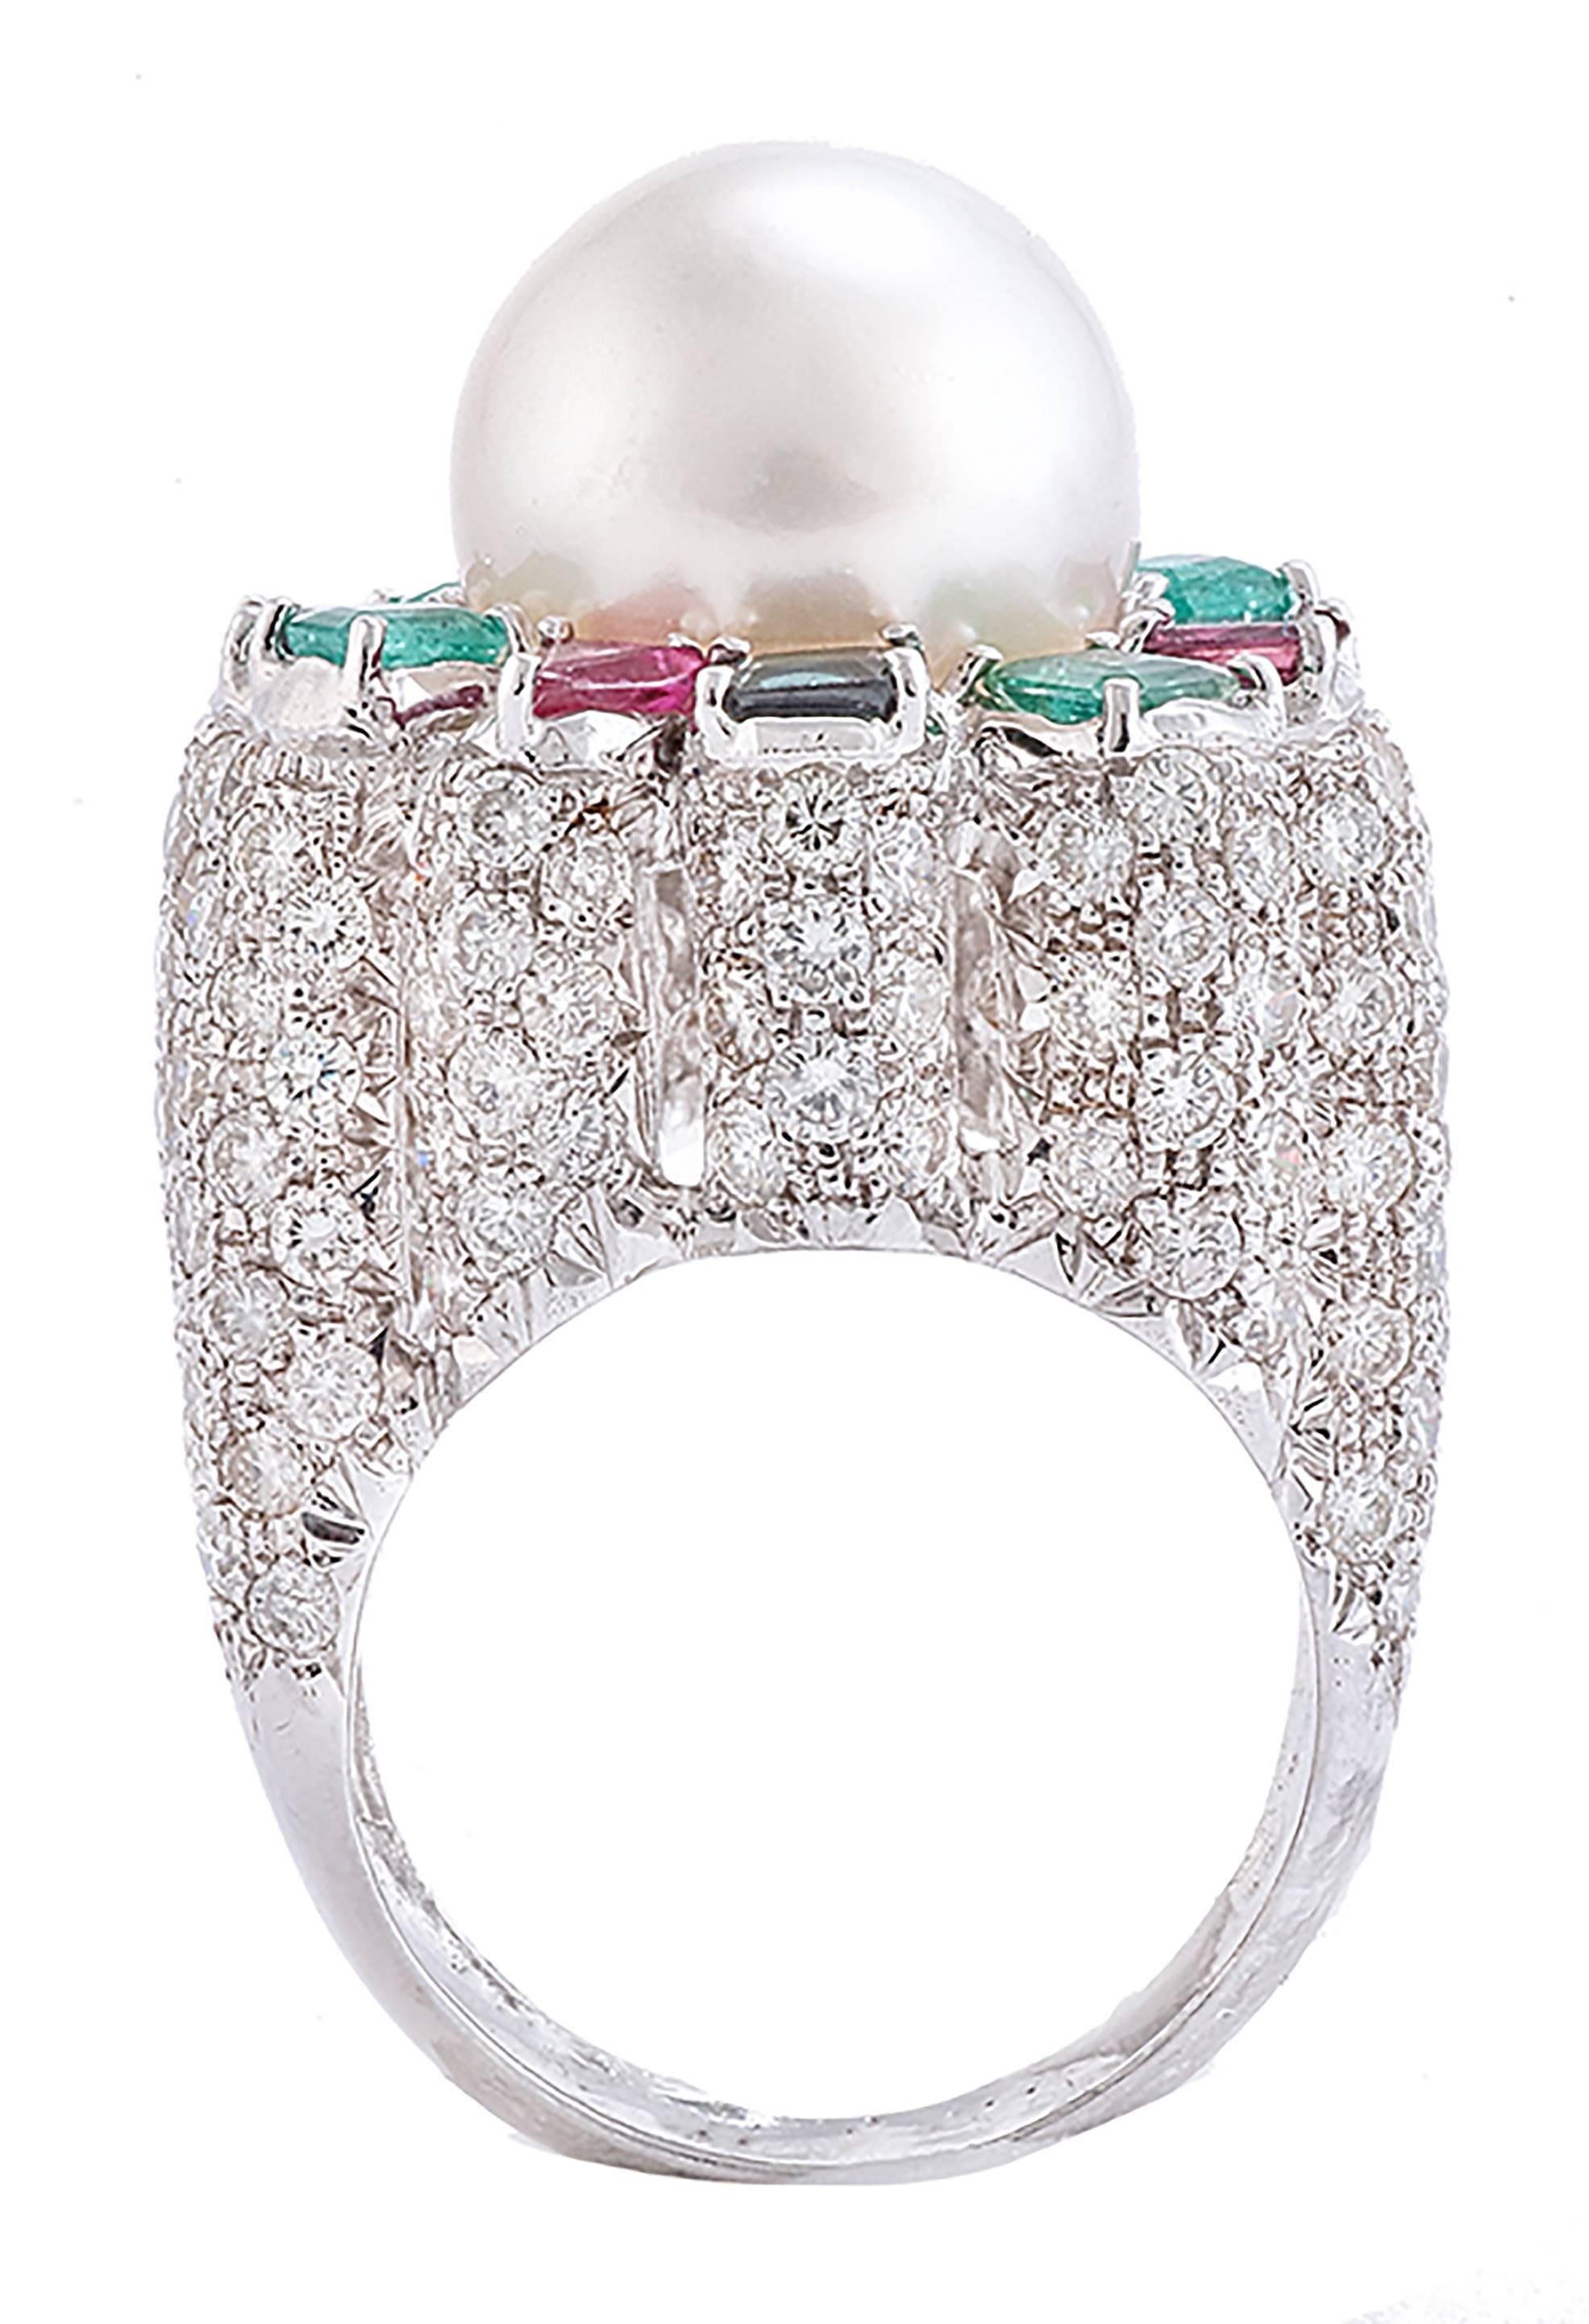 Mixed Cut Sapphires Emeralds Rubies Diamonds Pearl White Gold Ring For Sale